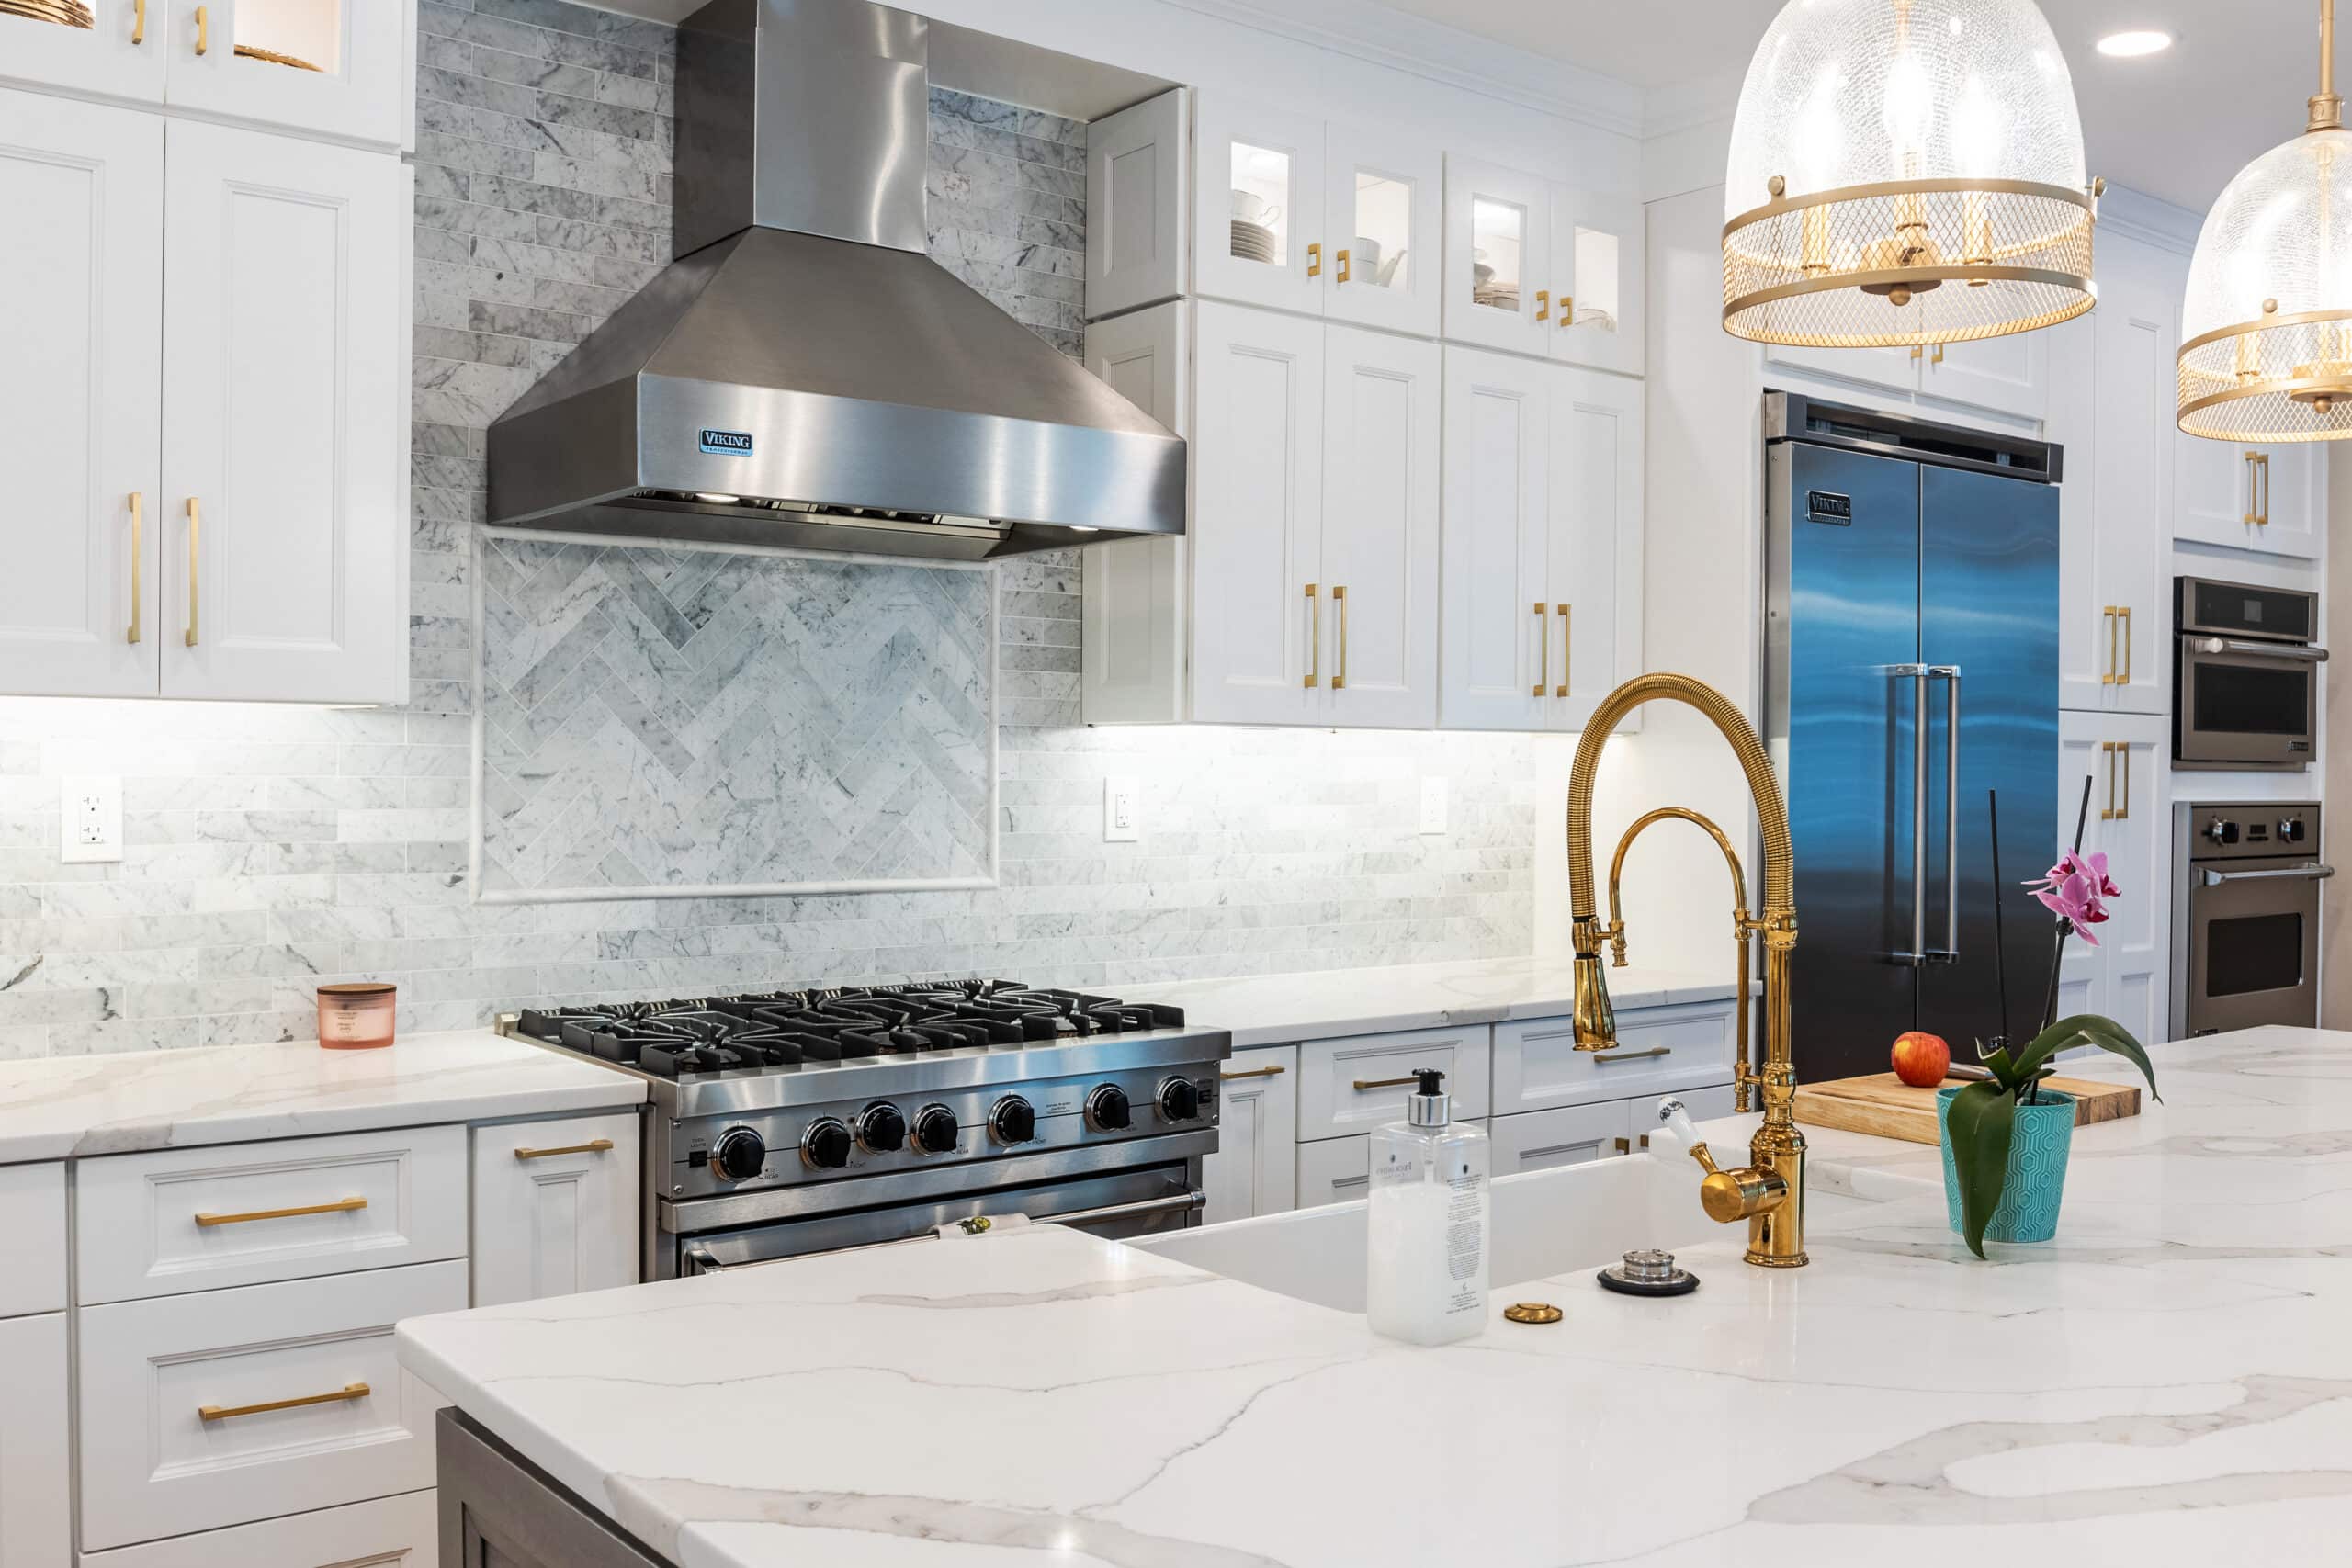 A kitchen with white cabinets and brass fixture